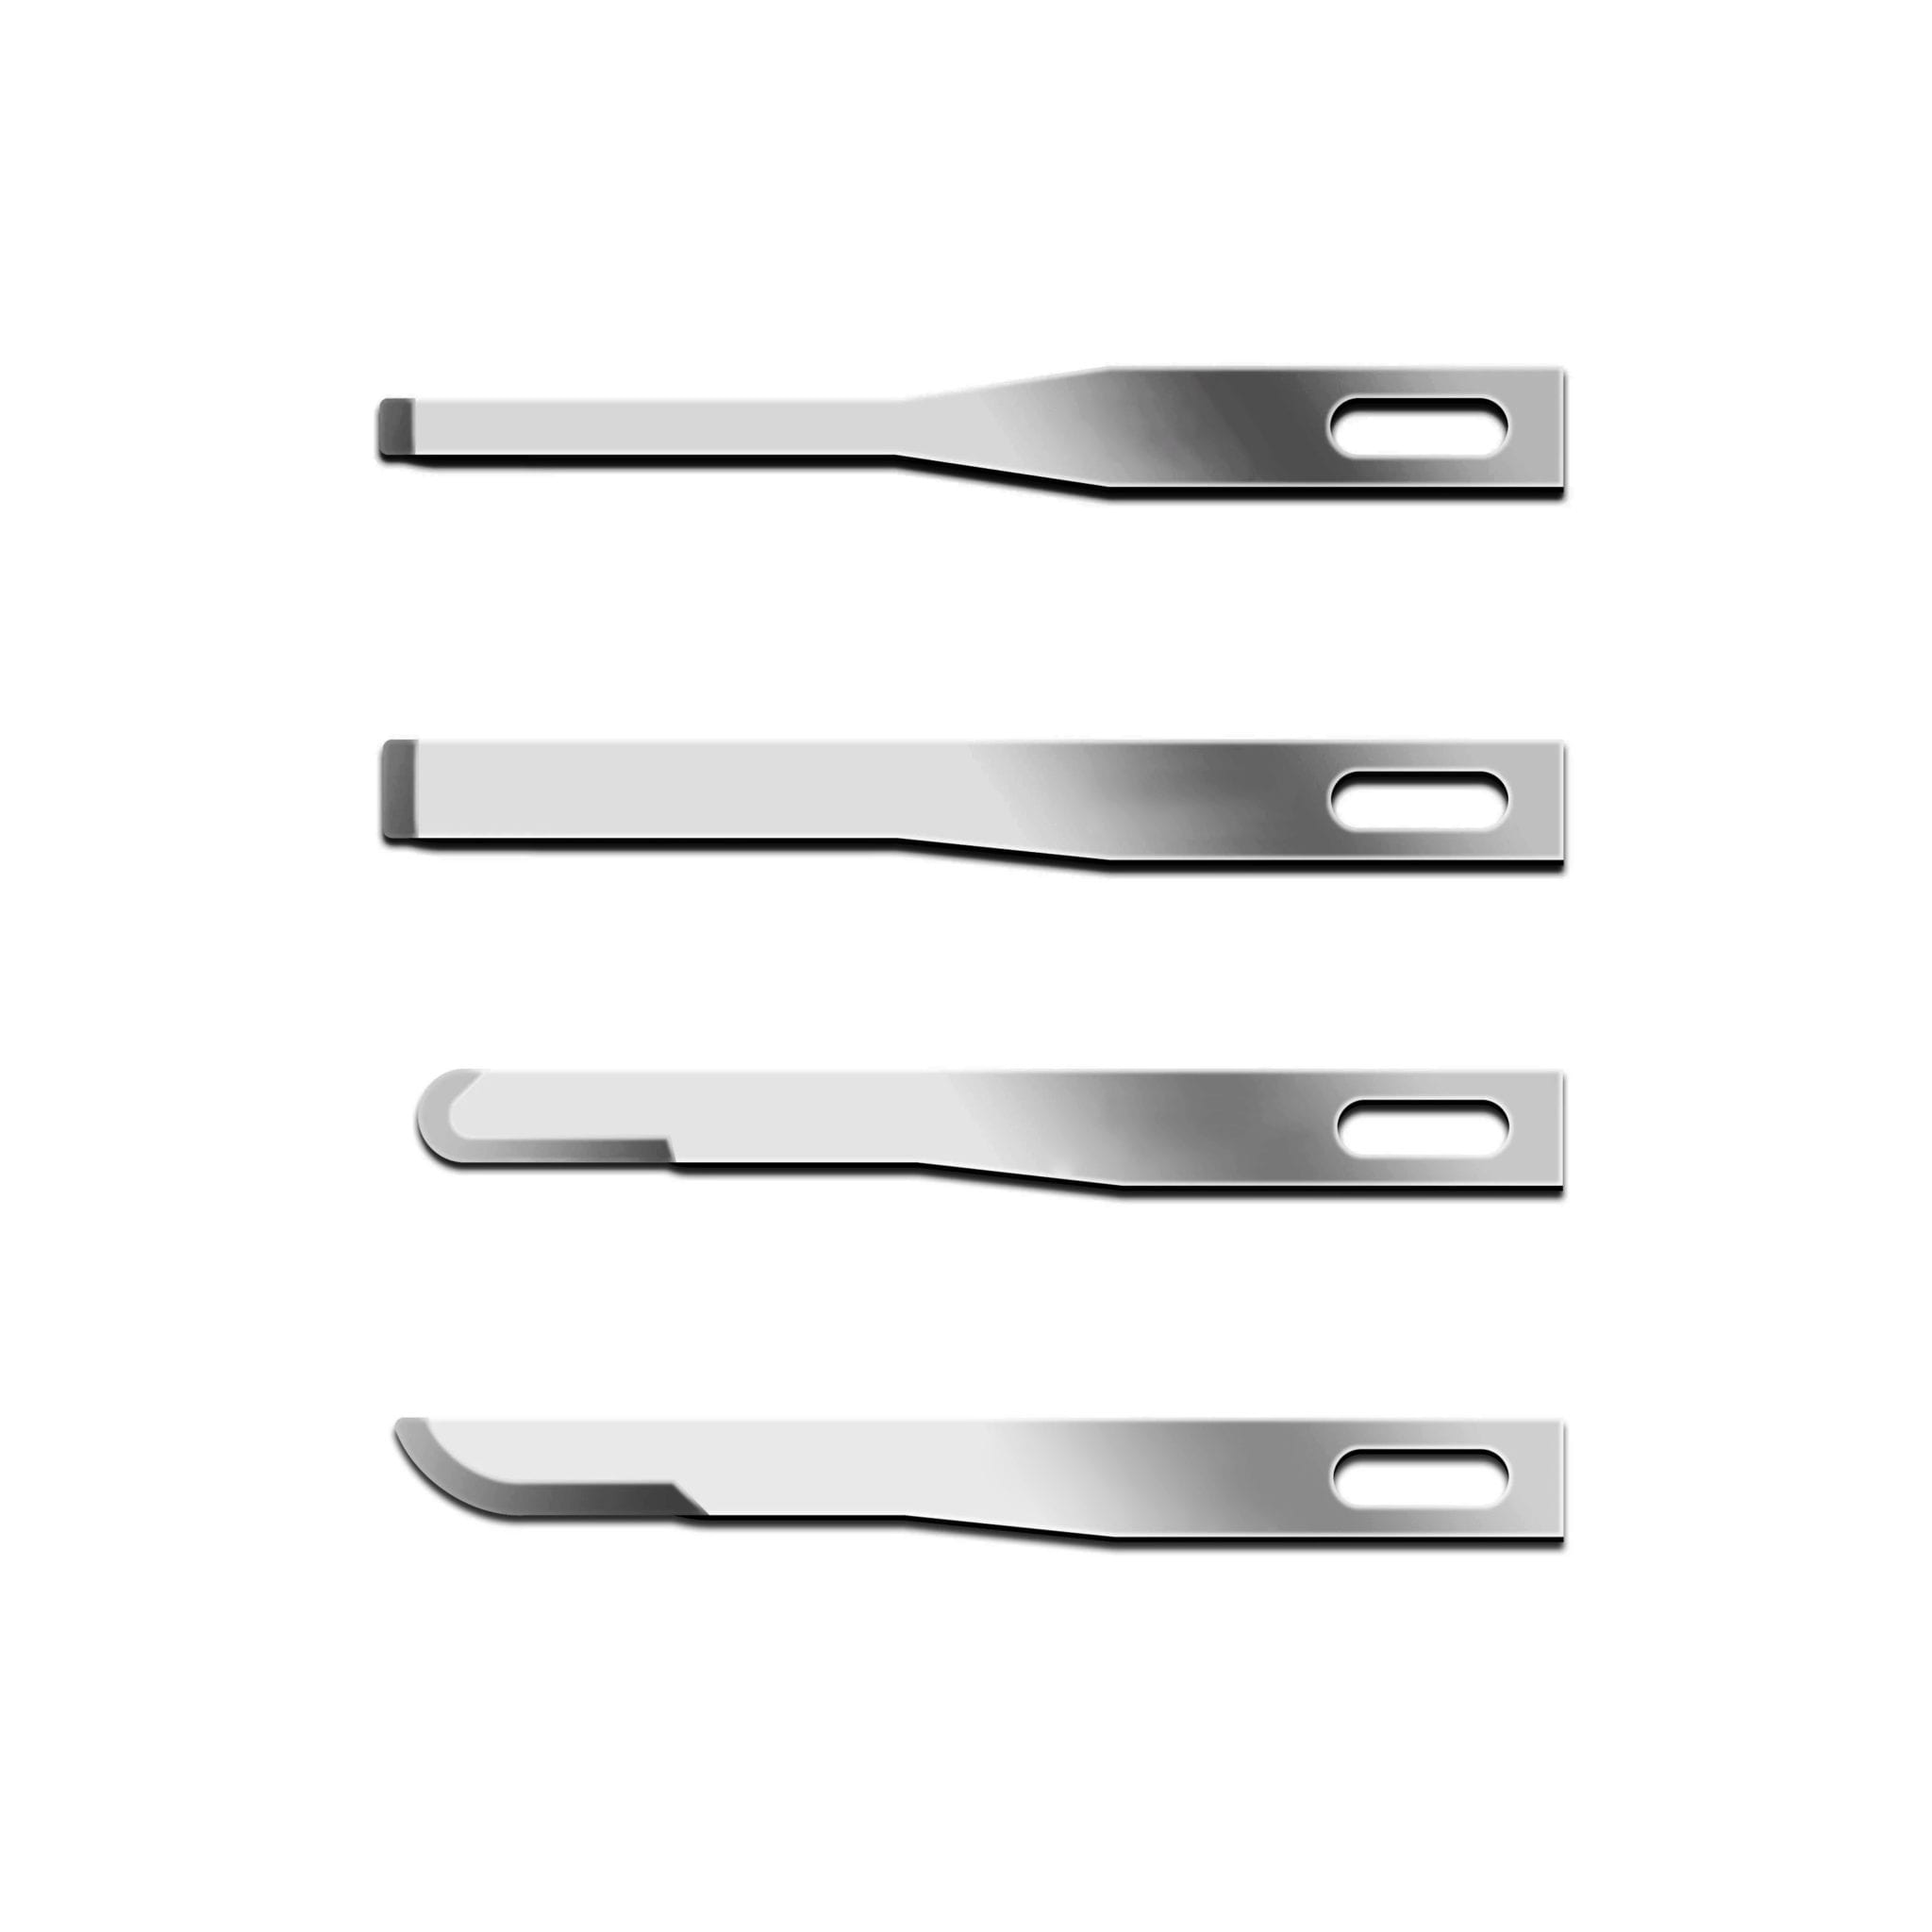 Gouge Blades Surgical Blades Carbon Steel Sterile Chiropody Podiatry 